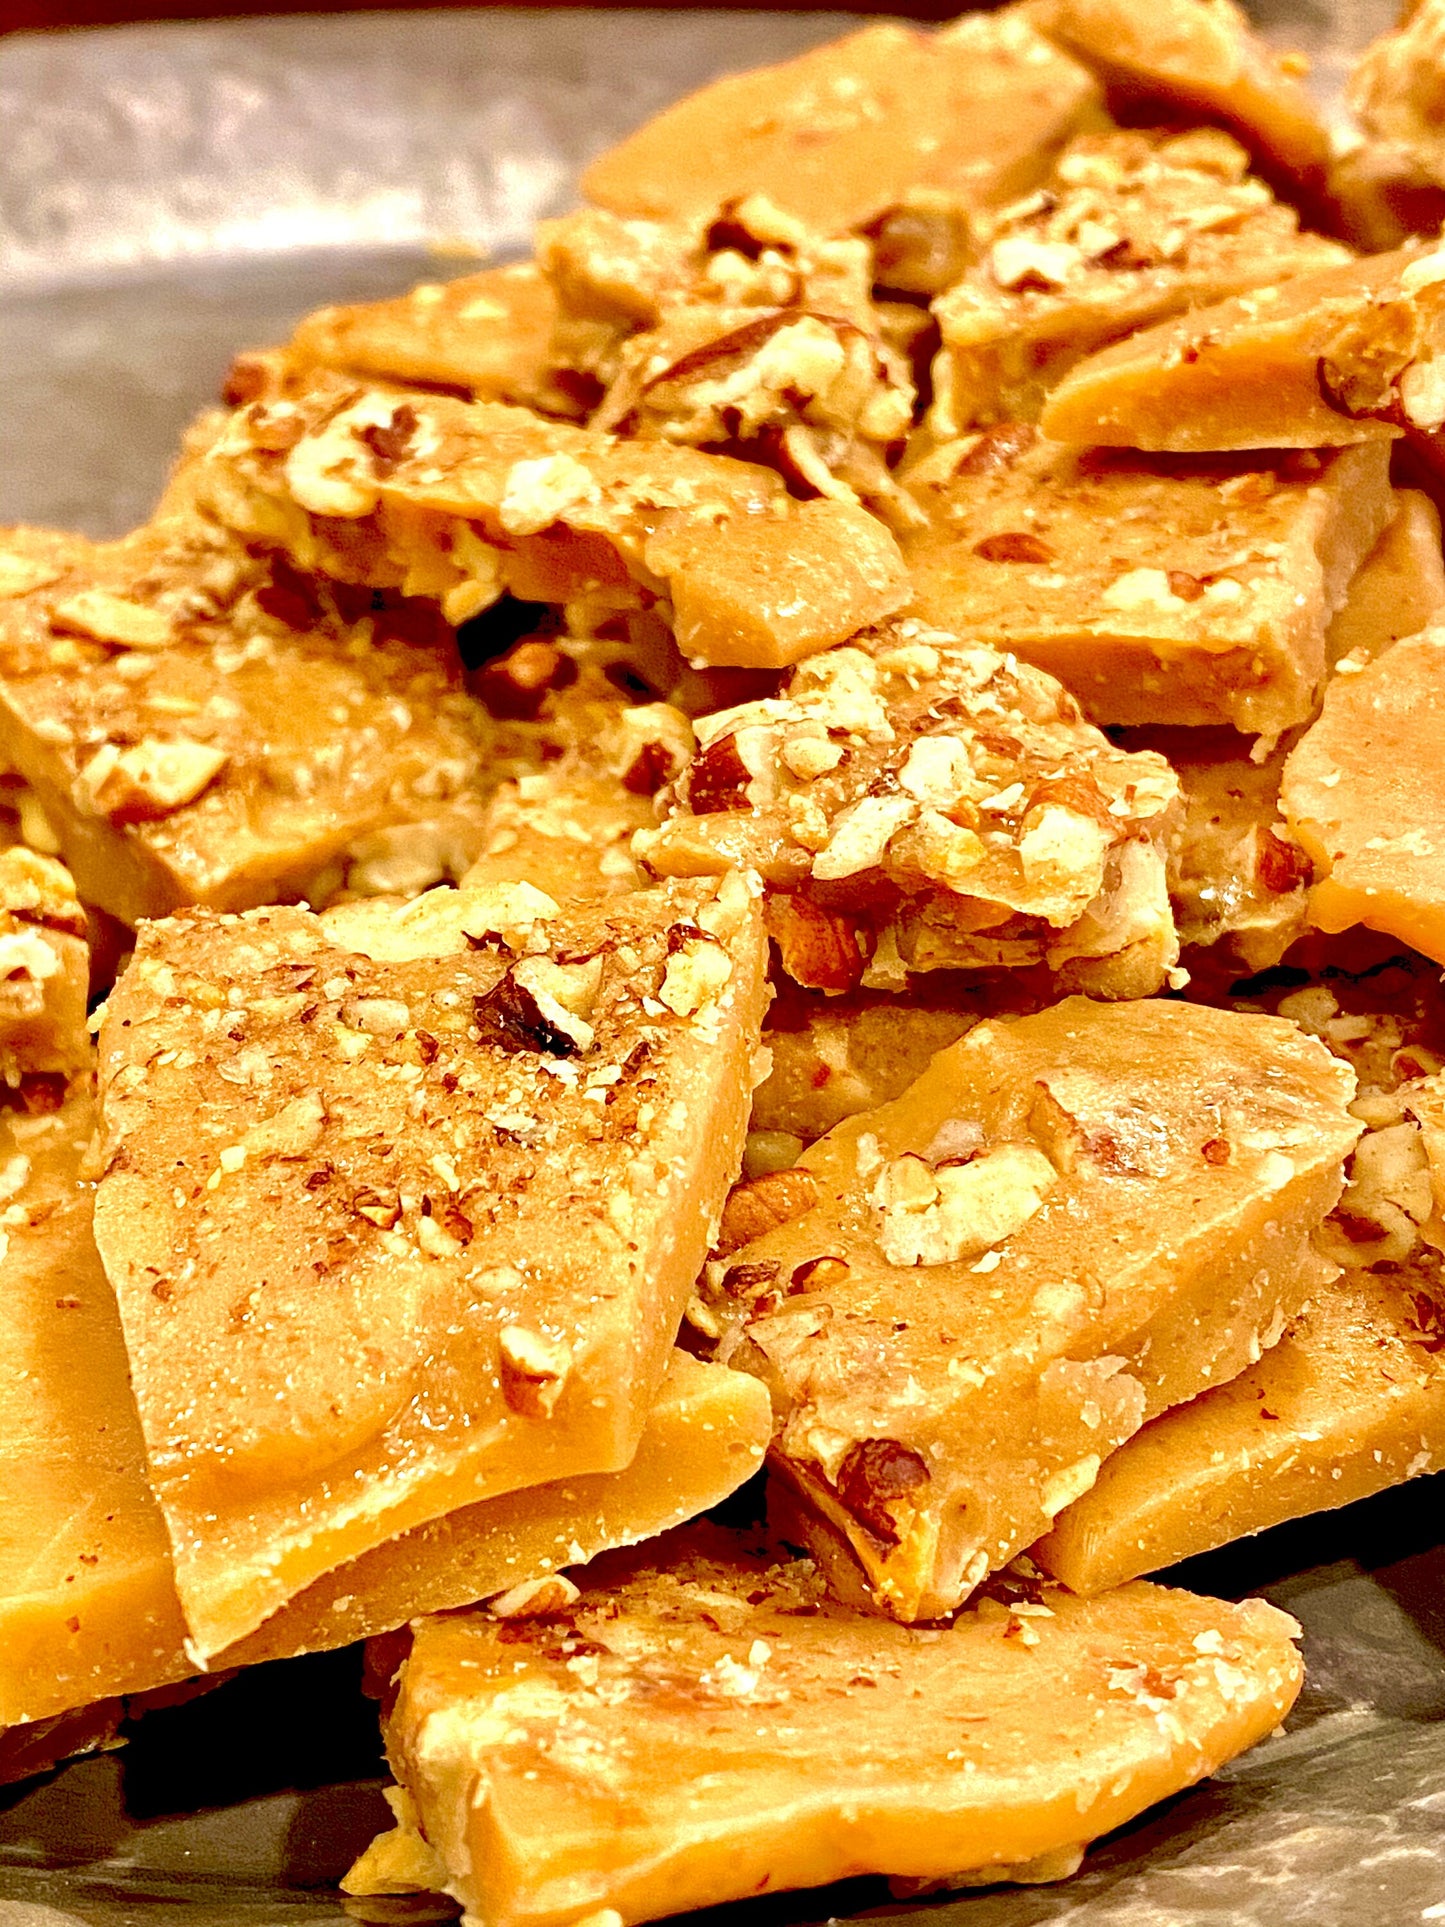 Toffee with fresh roasted pecans